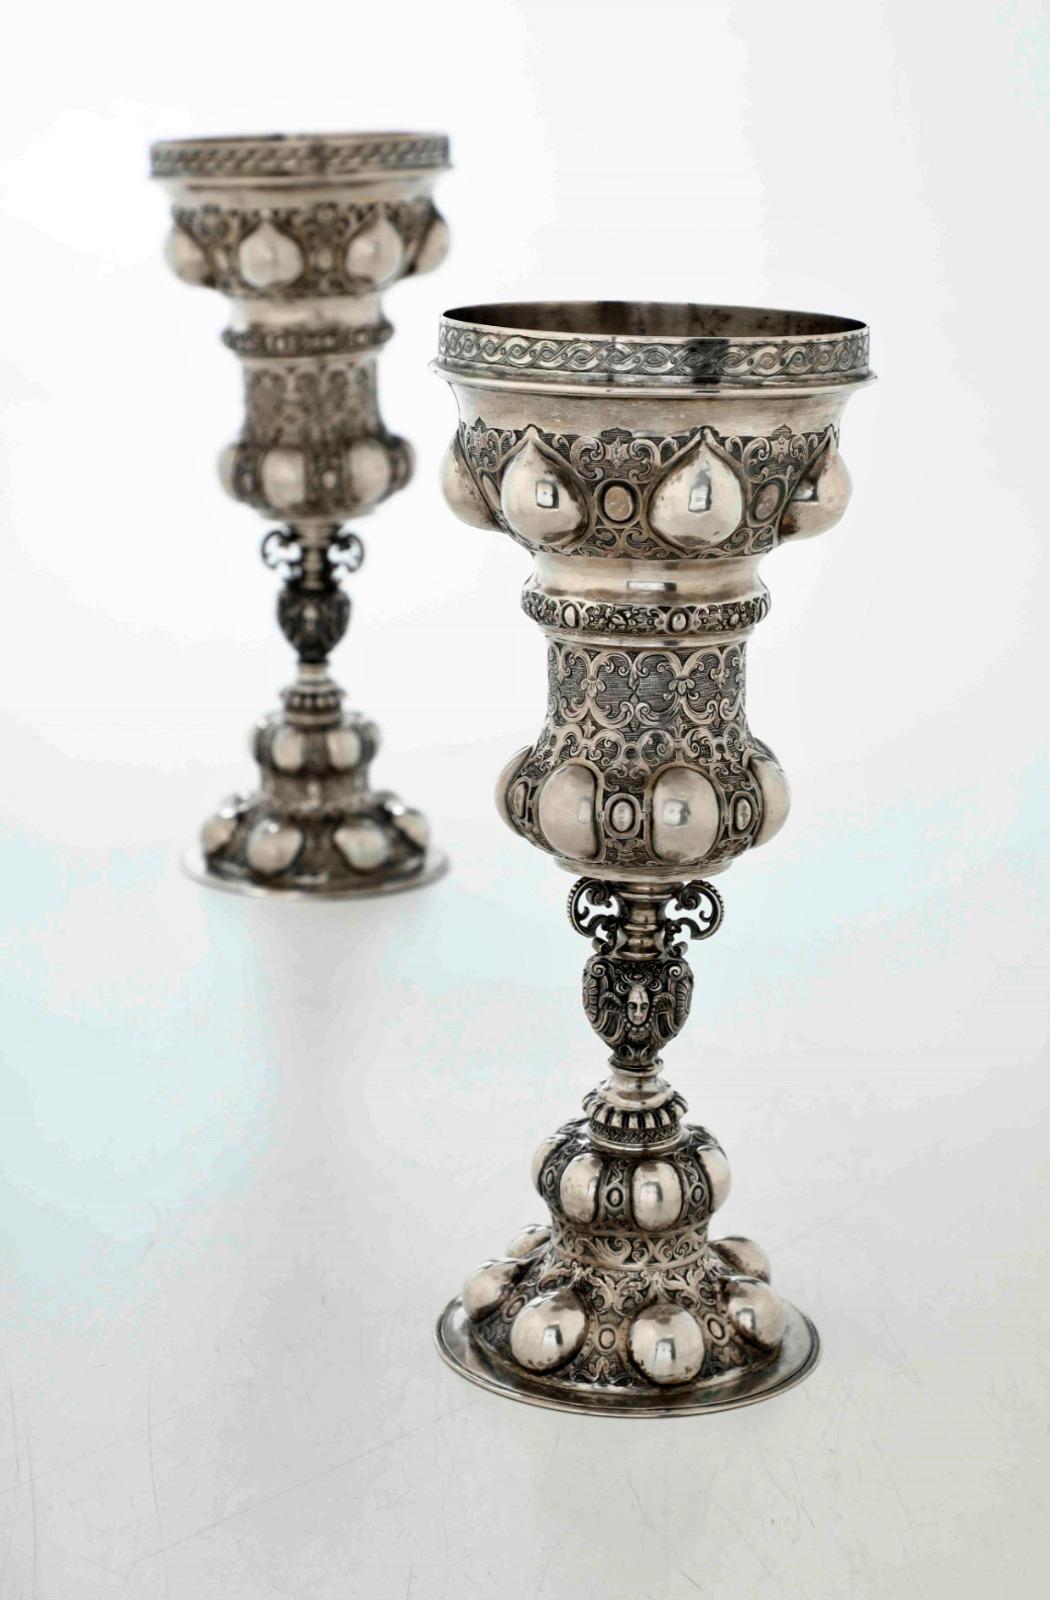 Hand-Crafted Pair of 18th Century Ausbourg-Germany Silver Cups